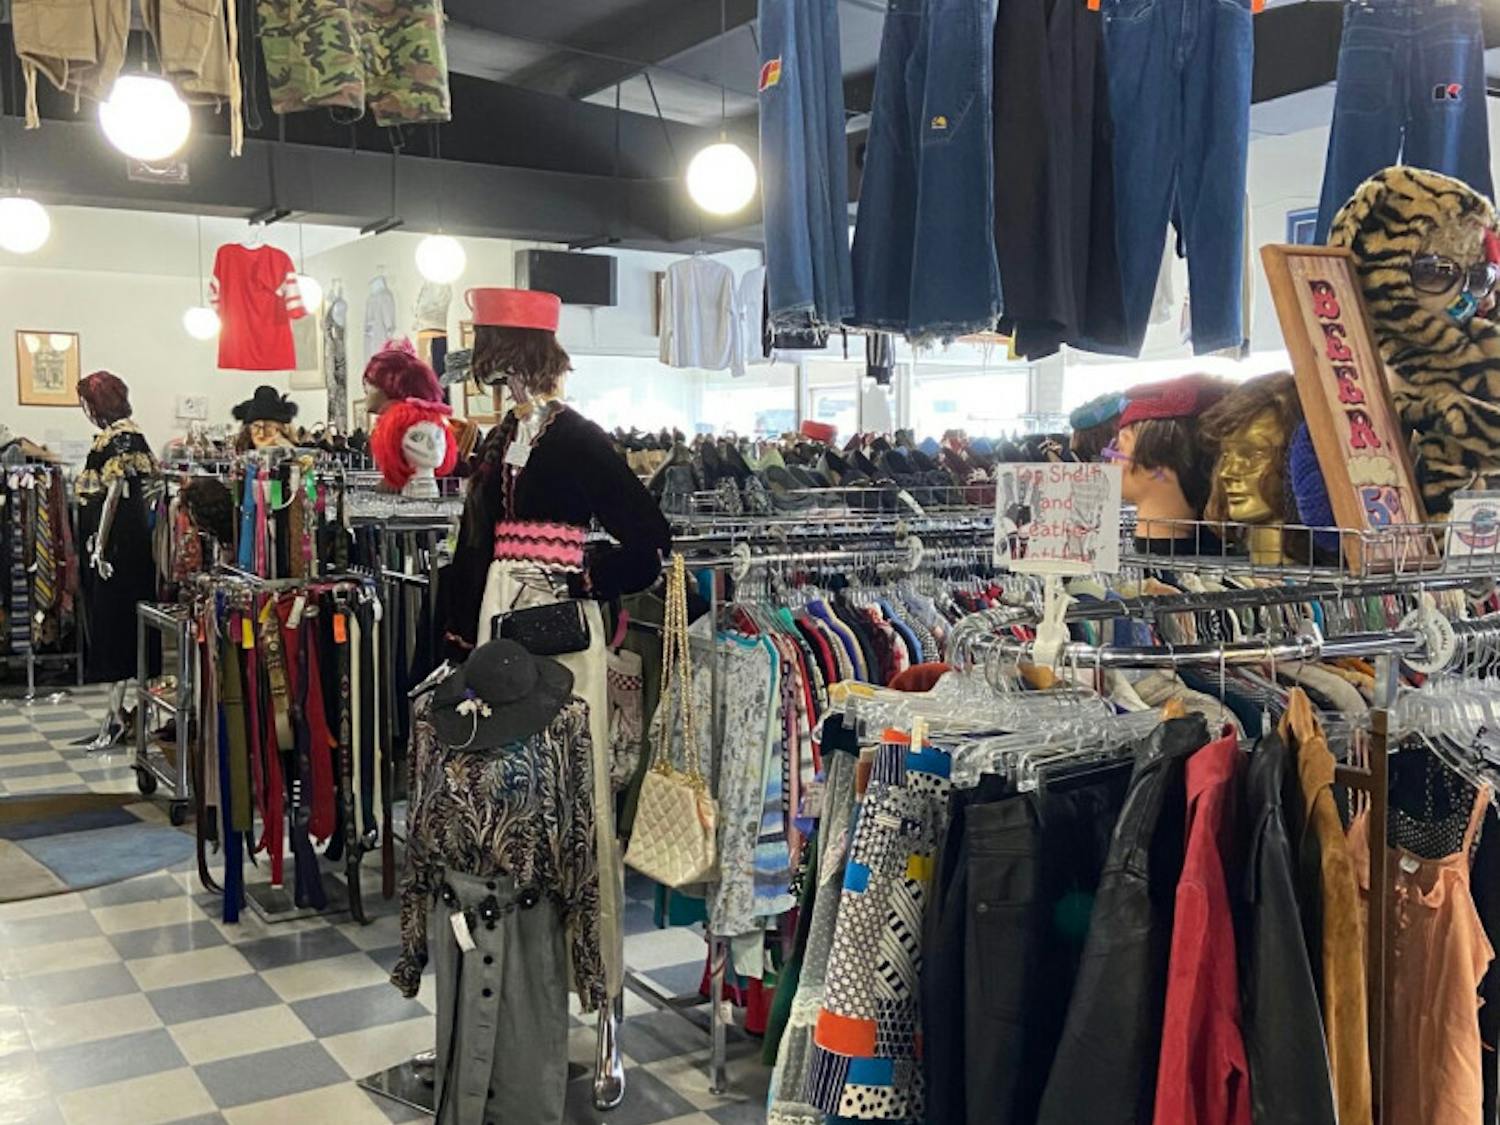 The Gainesville thrift store, Flashbacks Recycled Fashions, located at&nbsp;220 NW 8th Ave., has seen a surprising burst in customers wanting to expand their style following this year's COVID-19 pandemic shut downs.&nbsp;